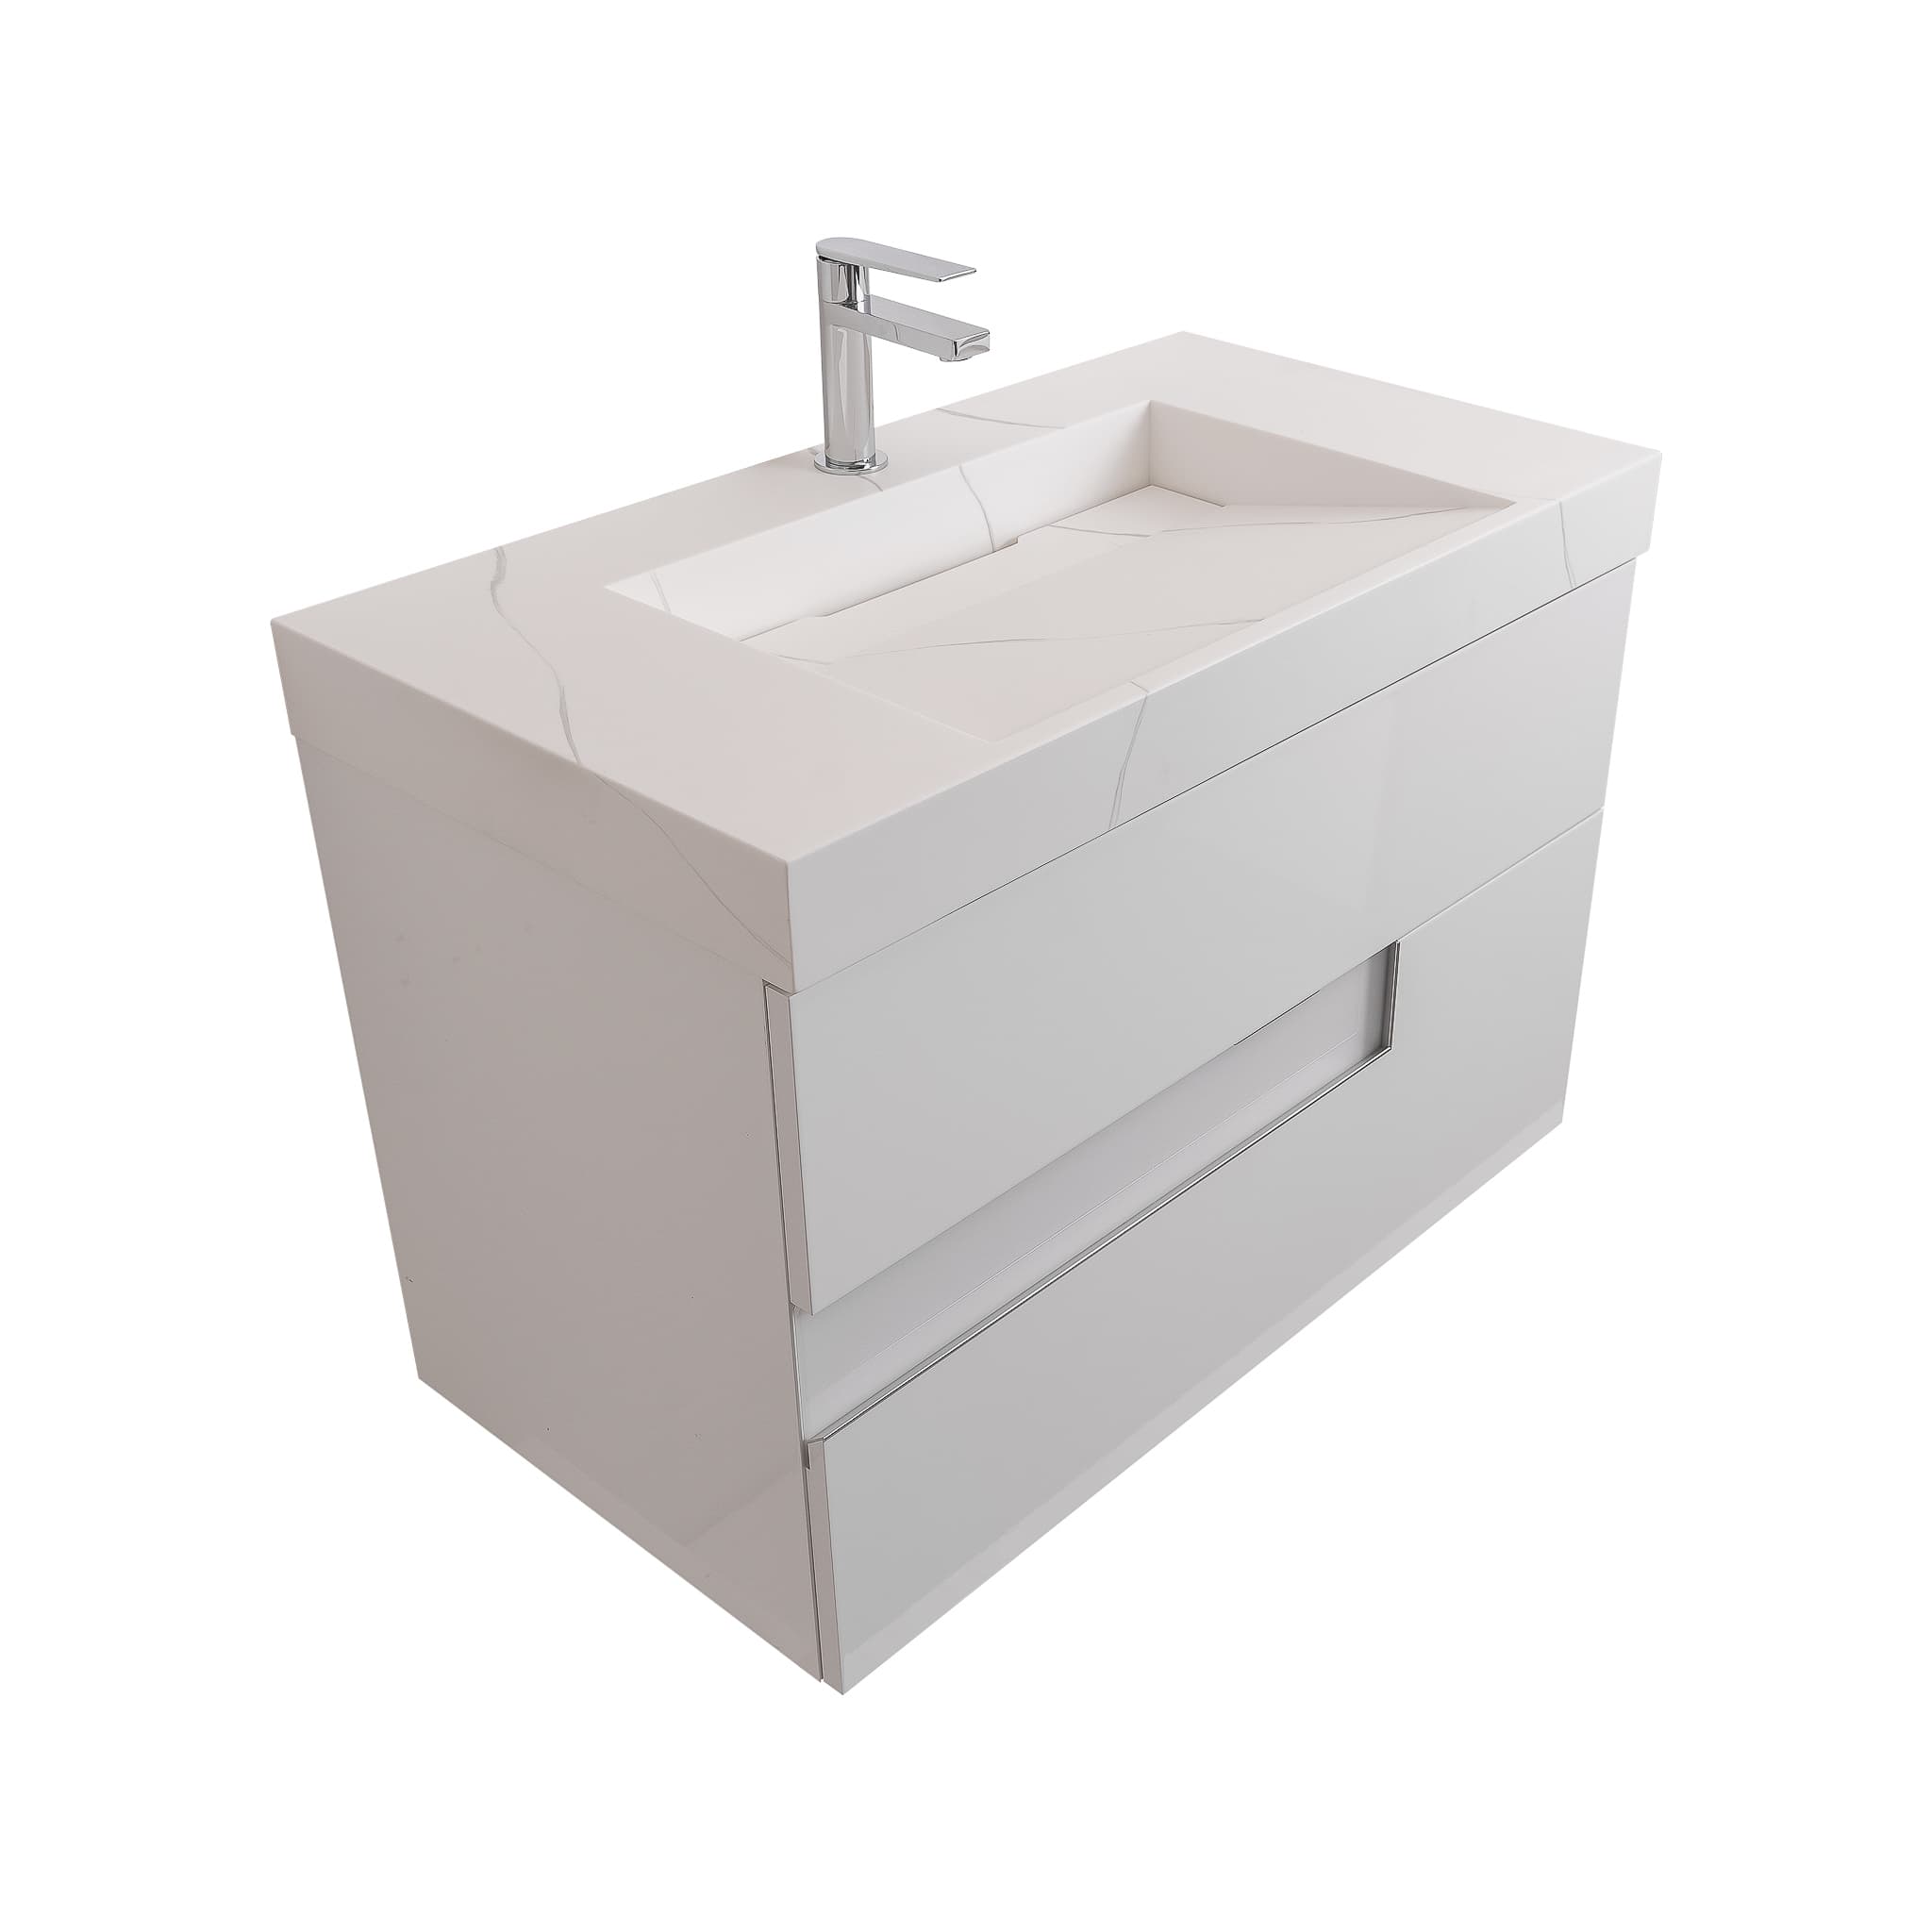 Vision 39.5 White High Gloss Cabinet, Solid Surface Matte White Top Carrara Infinity Sink, Wall Mounted Modern Vanity Set